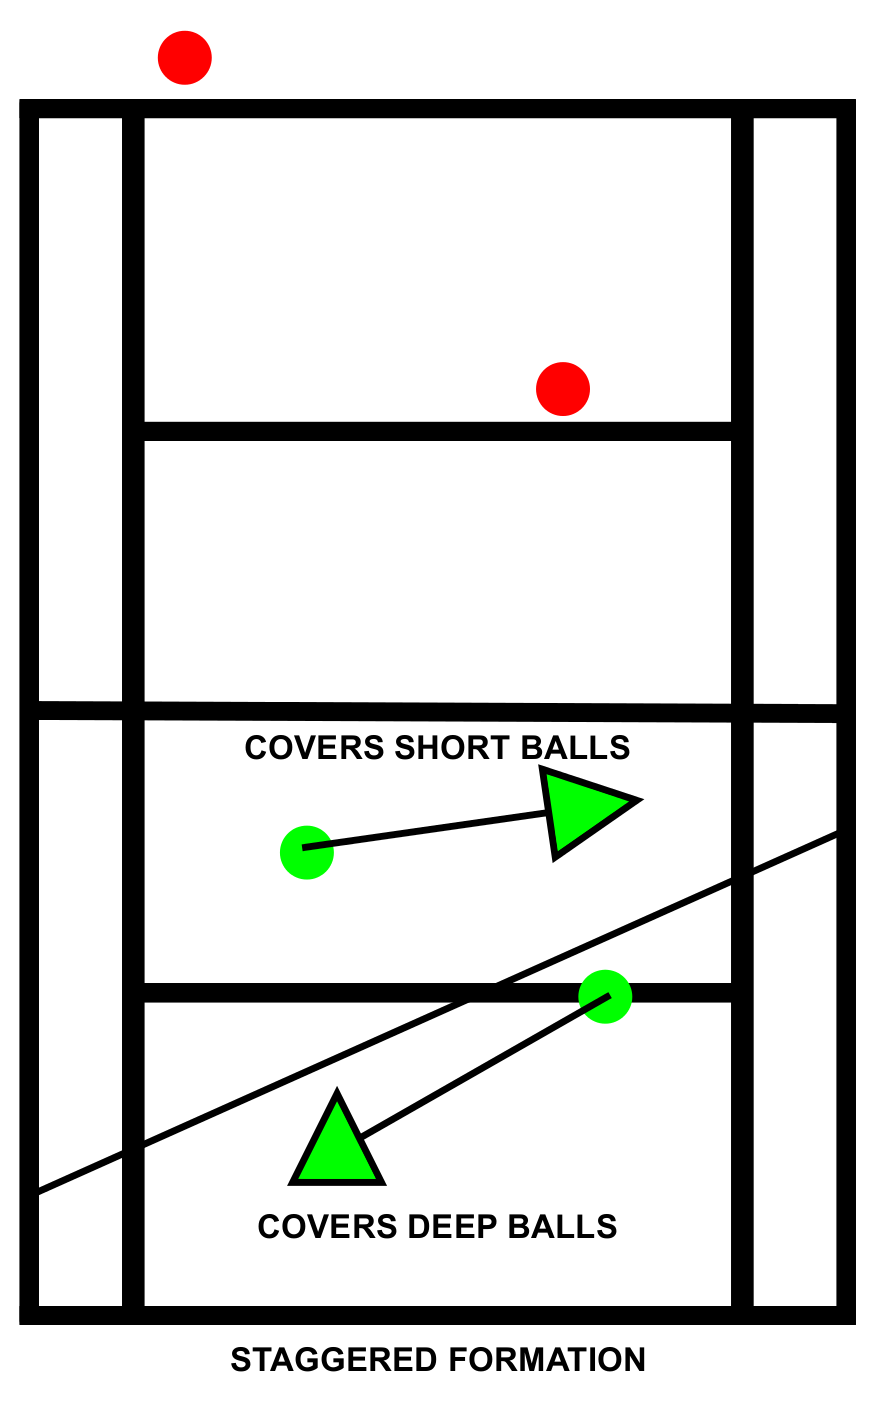 https://www.tennisnation.com/wp-content/uploads/2021/01/Tennis-Doubles-Positioning-Staggered-Formation-Court-Coverage.png